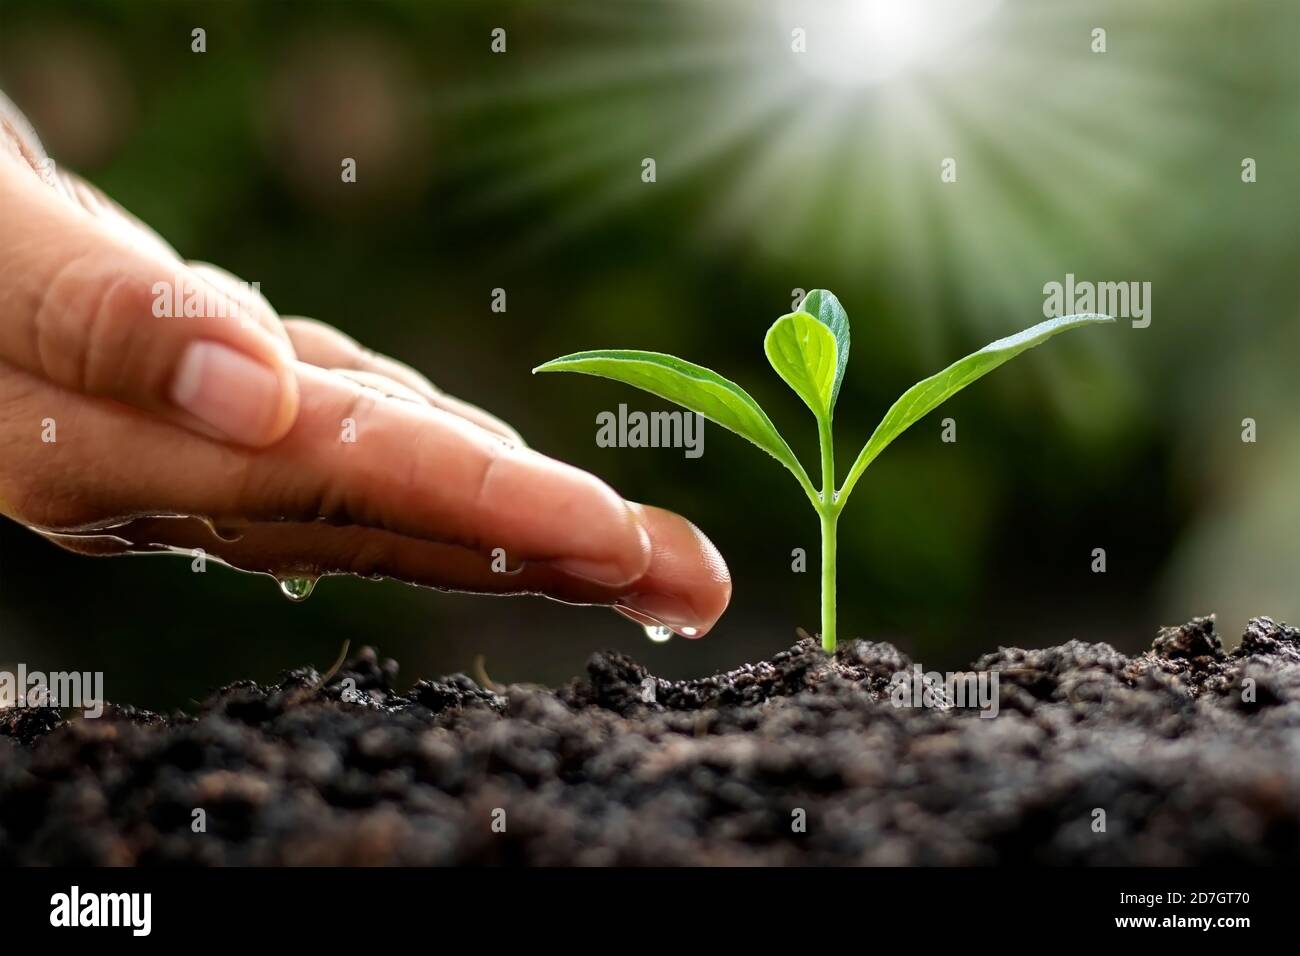 Green trees growing on the ground and agriculture hands that water the trees, concept of growing trees and preserving sustainable nature. Stock Photo